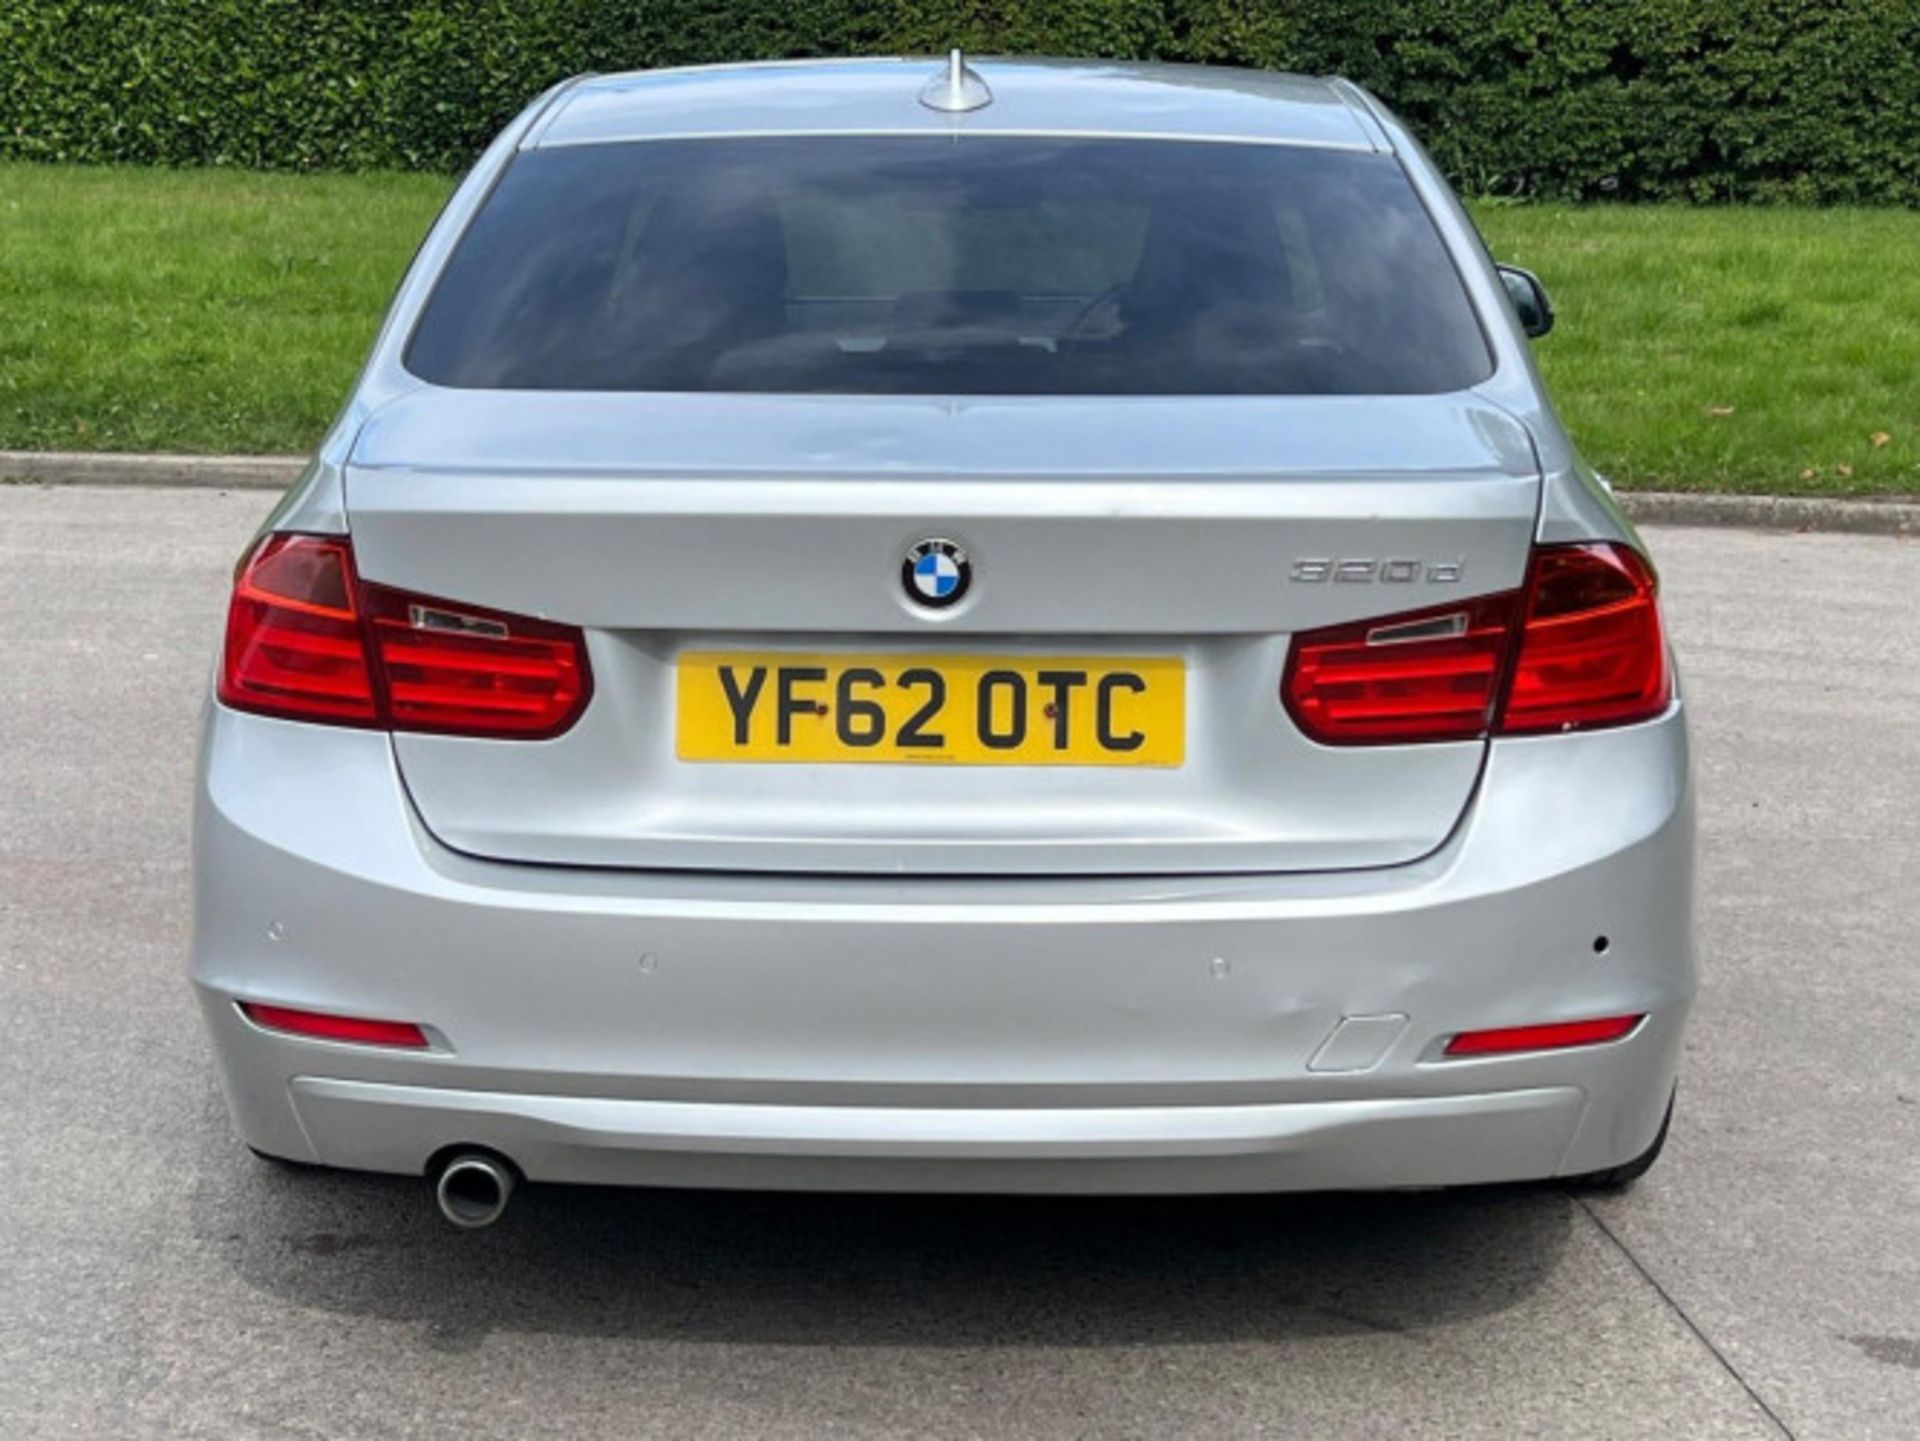 BMW 3 SERIES 2.0 DIESEL ED START STOP - A WELL-MAINTAINED GEM >>--NO VAT ON HAMMER--<< - Image 224 of 229